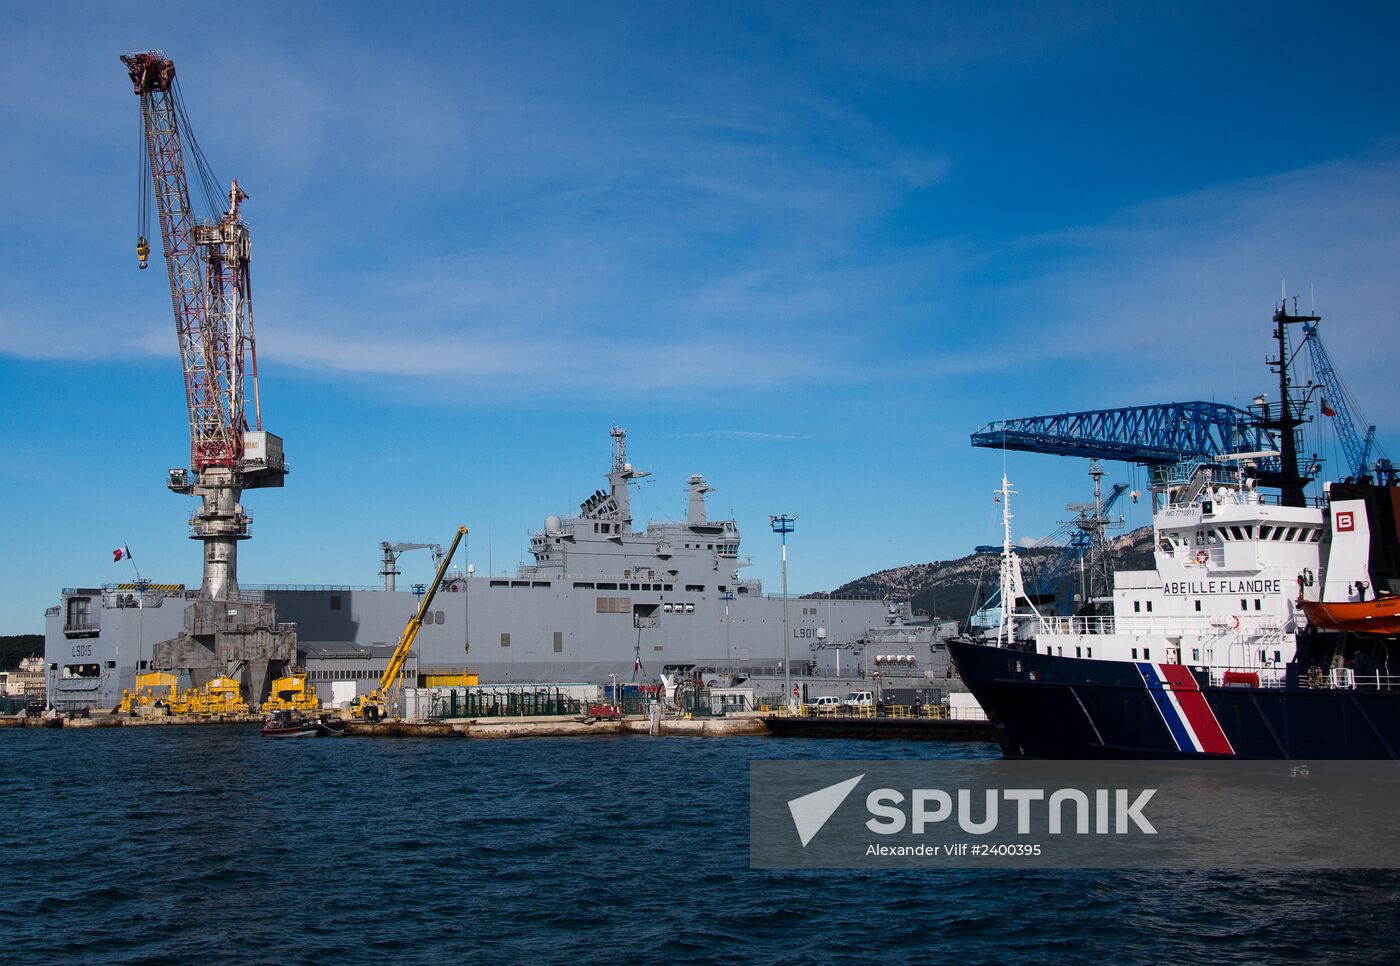 The Dixmude multi-purpose amphibious assault ship of the Mistral class